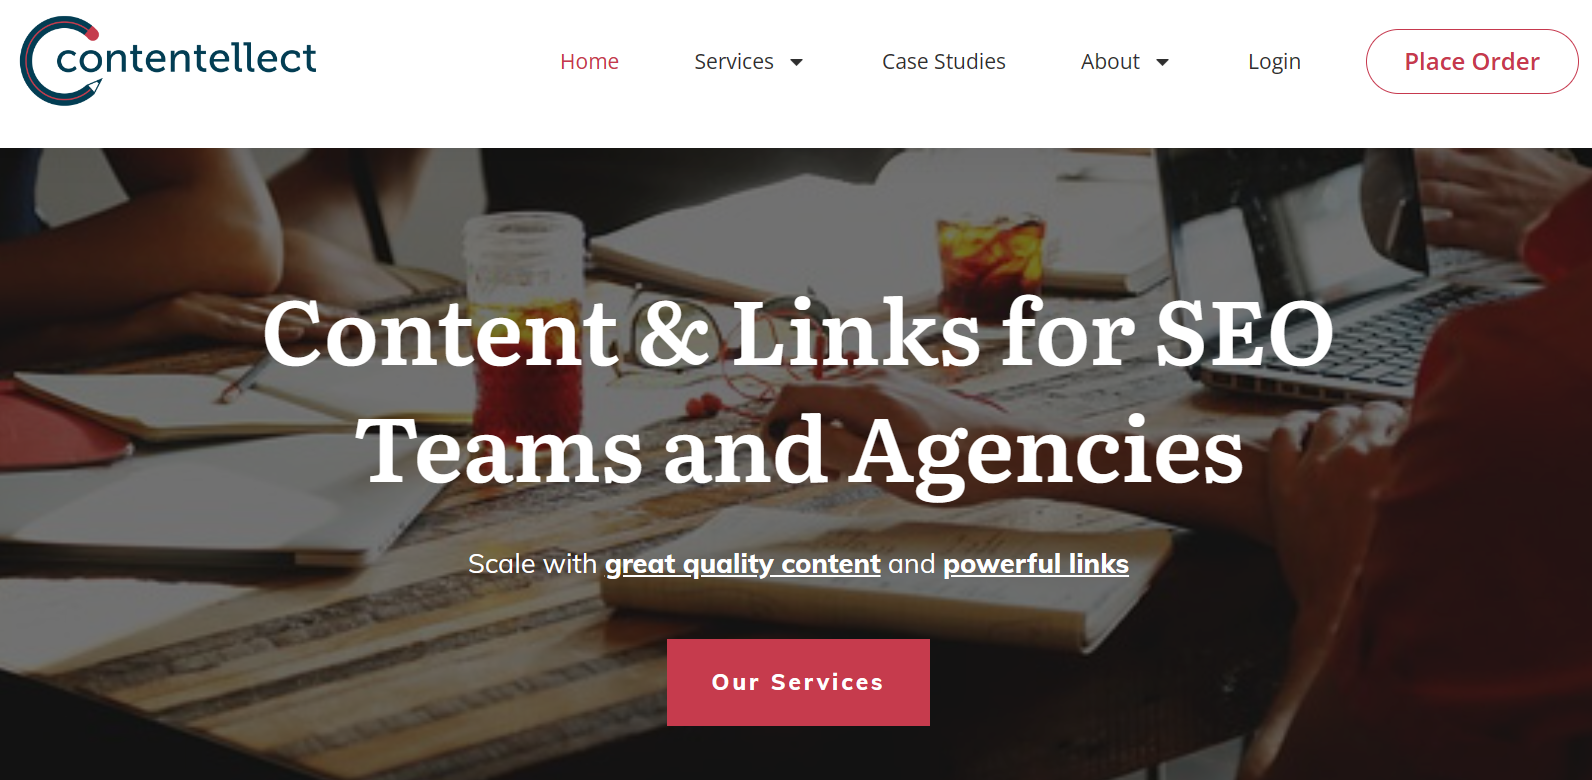 Contentellect Homepage